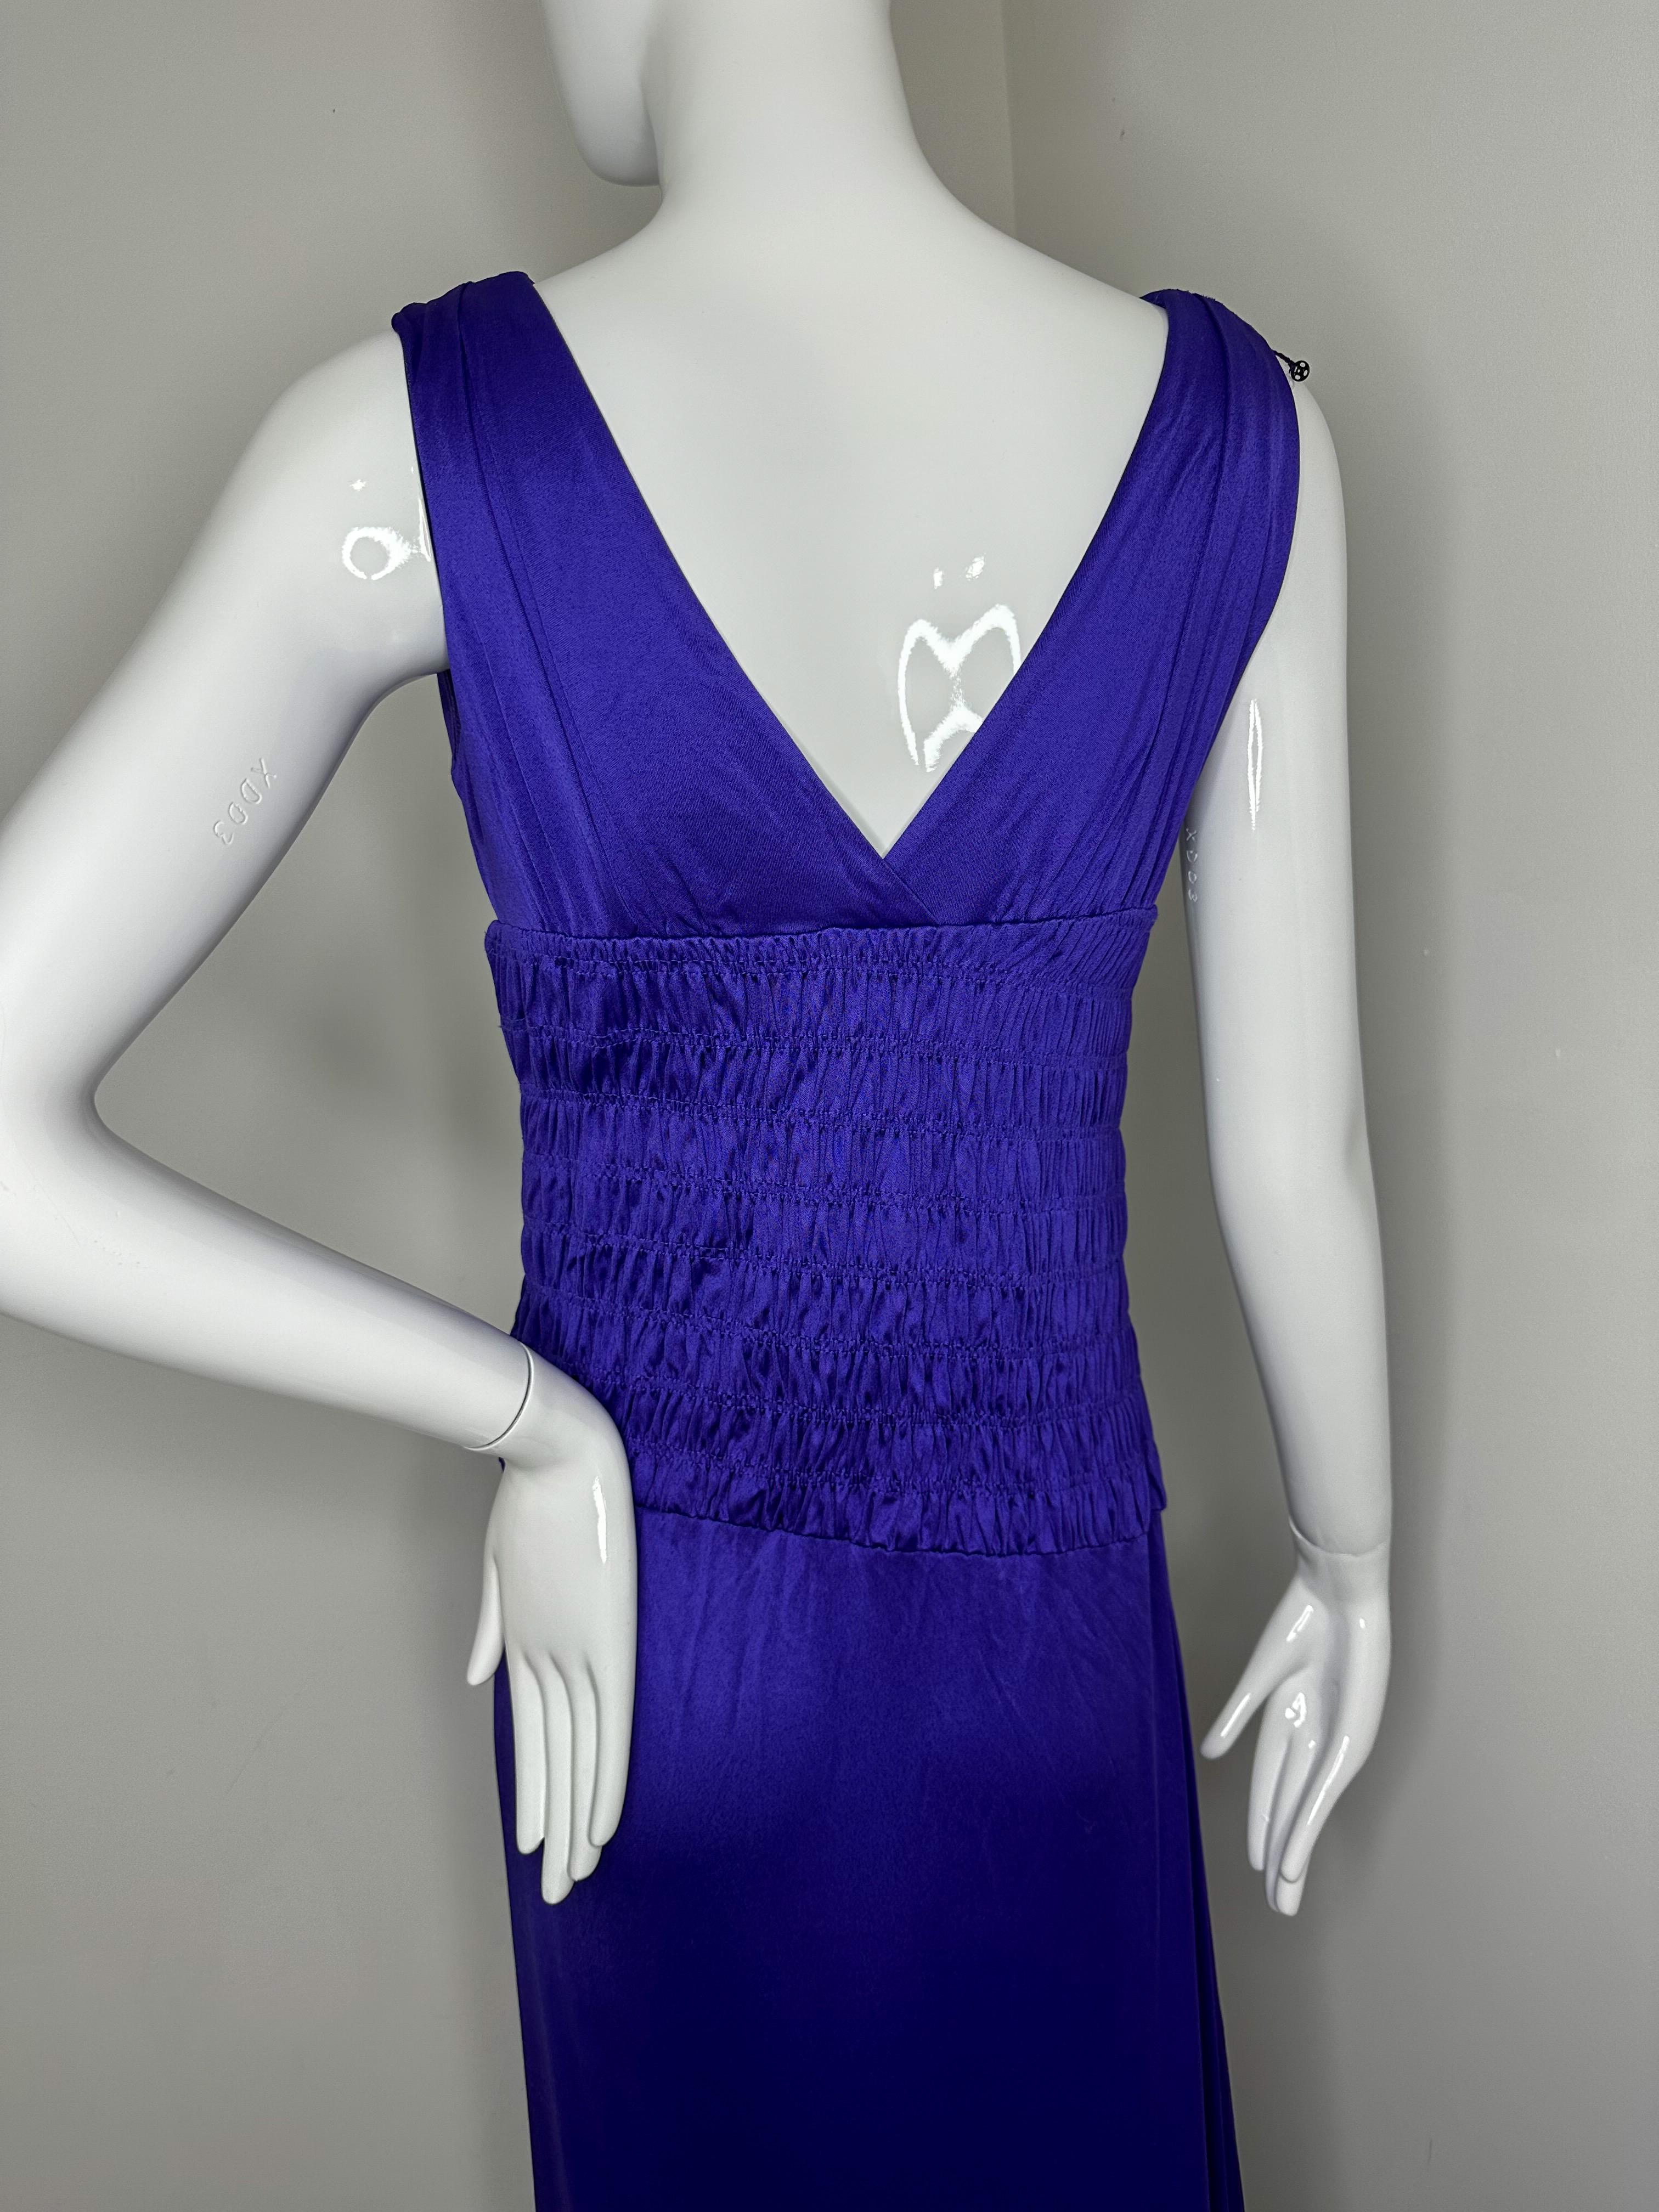 Women's Christian Dior purple gown For Sale